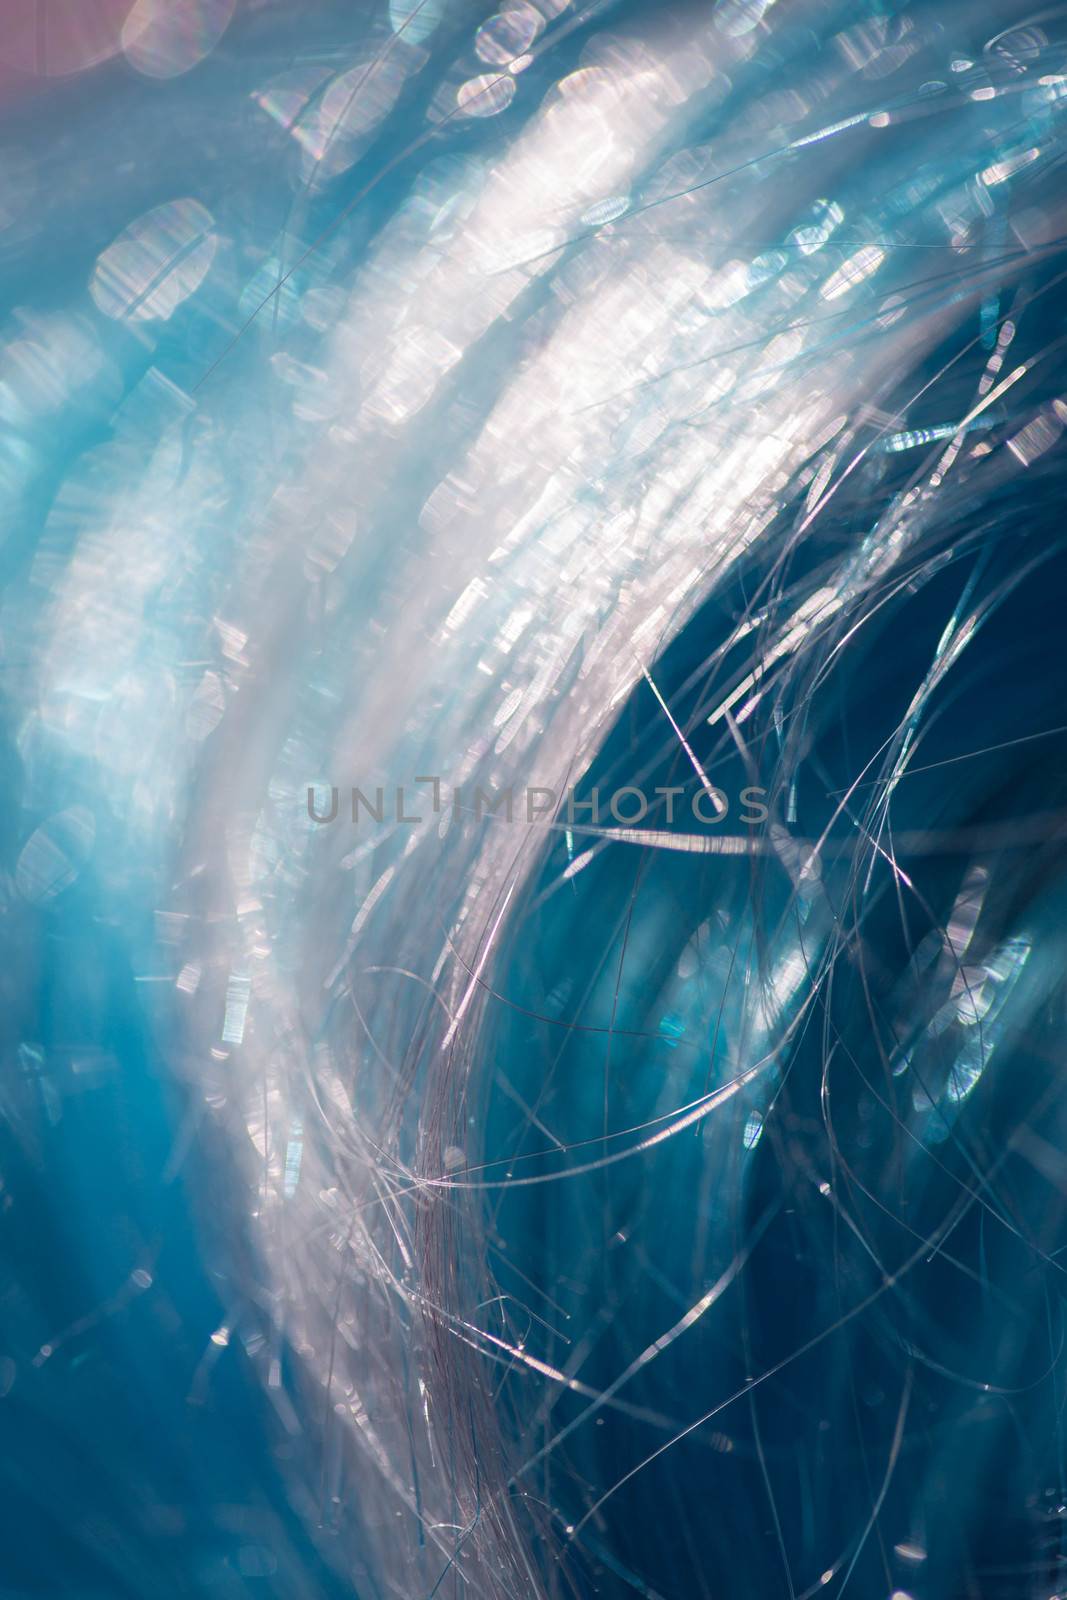 Abstract background of blue hairs by tadeush89